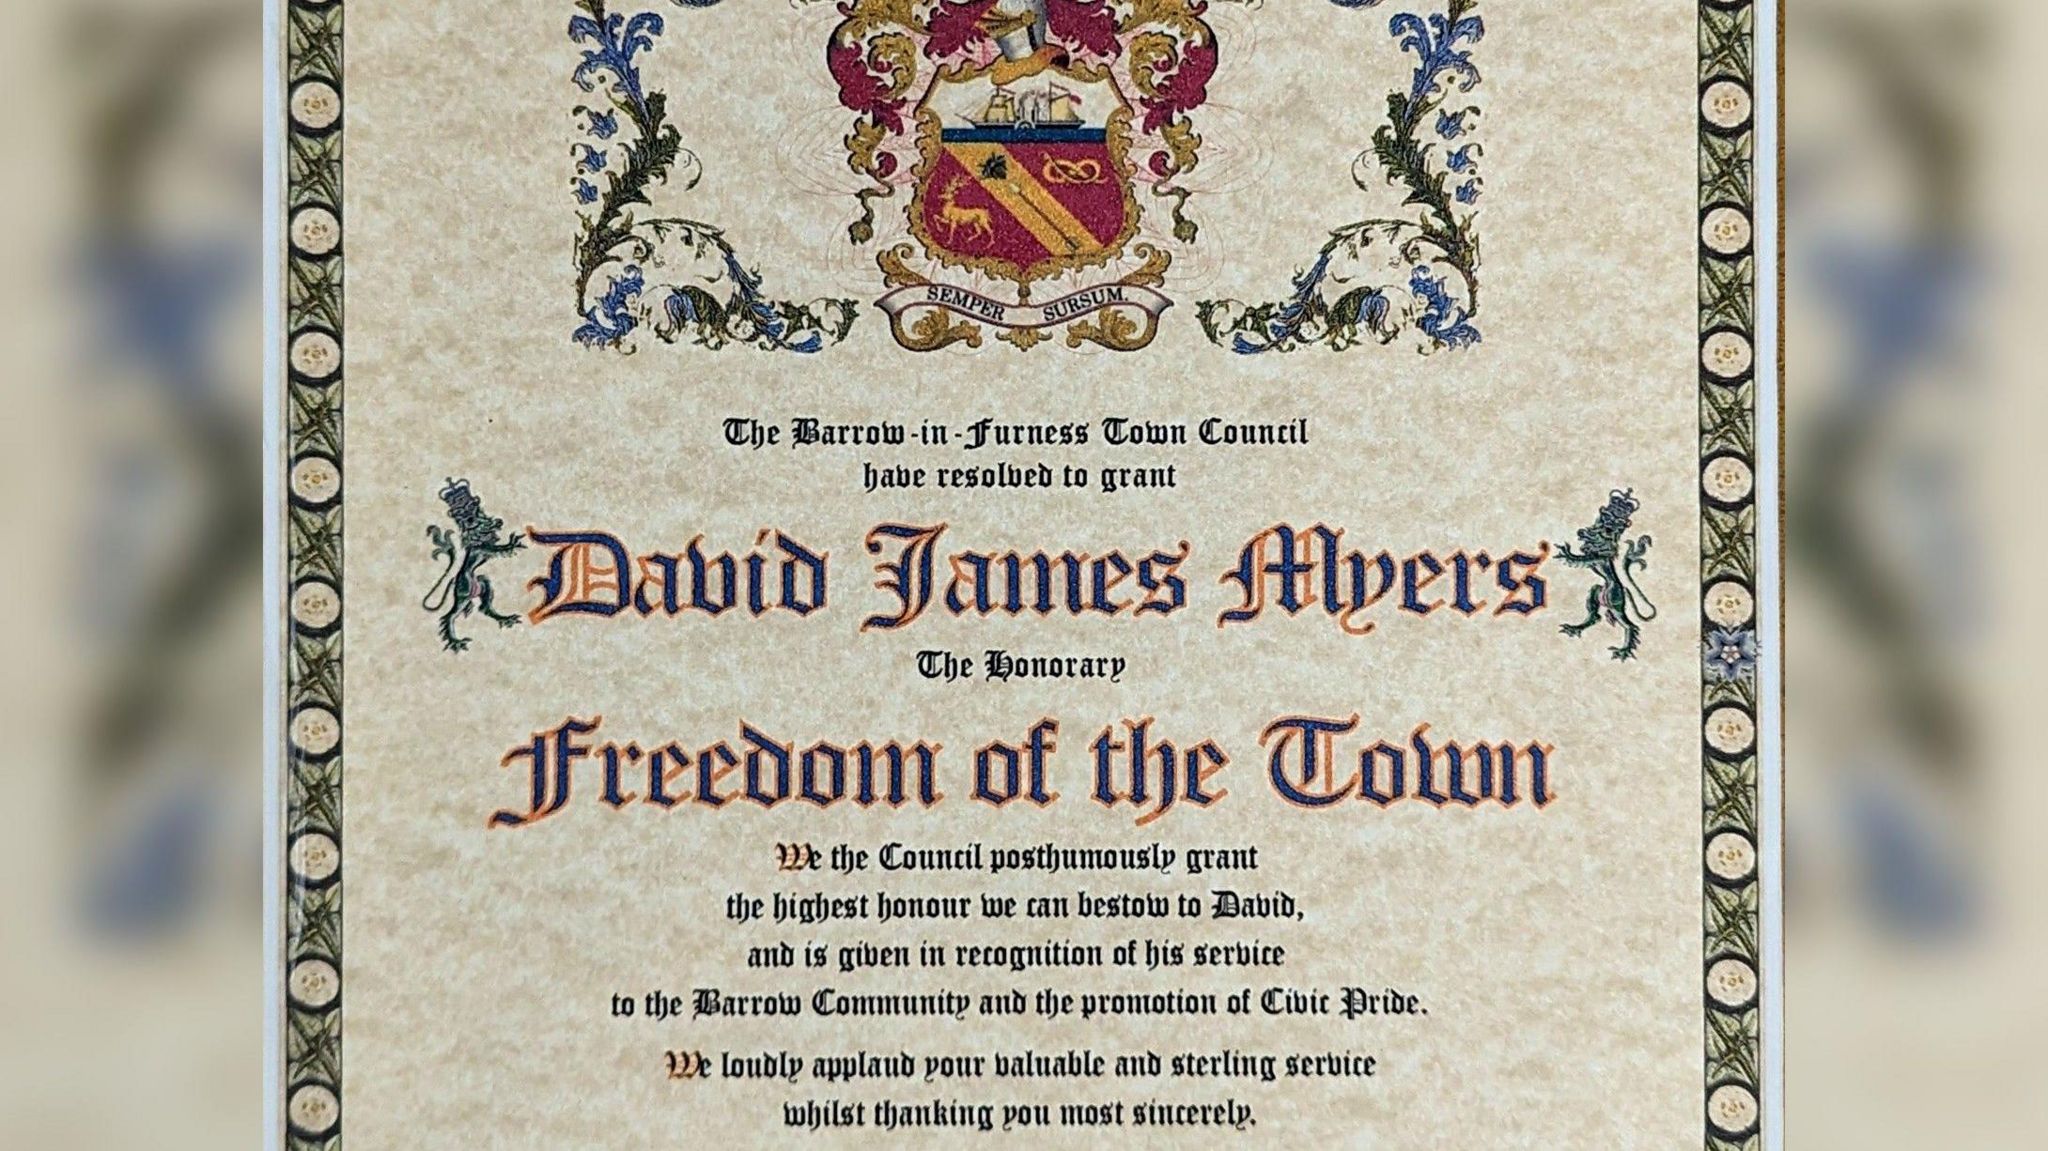 The wording on the scroll reads: "We, the council, posthumously grant the highest honour we can bestow to David, and is given in recognition of his service to the Barrow Community and the promotion of Civic Pride. "We loudly applaud your valuable and sterling service whilst thanking you most sincerely.